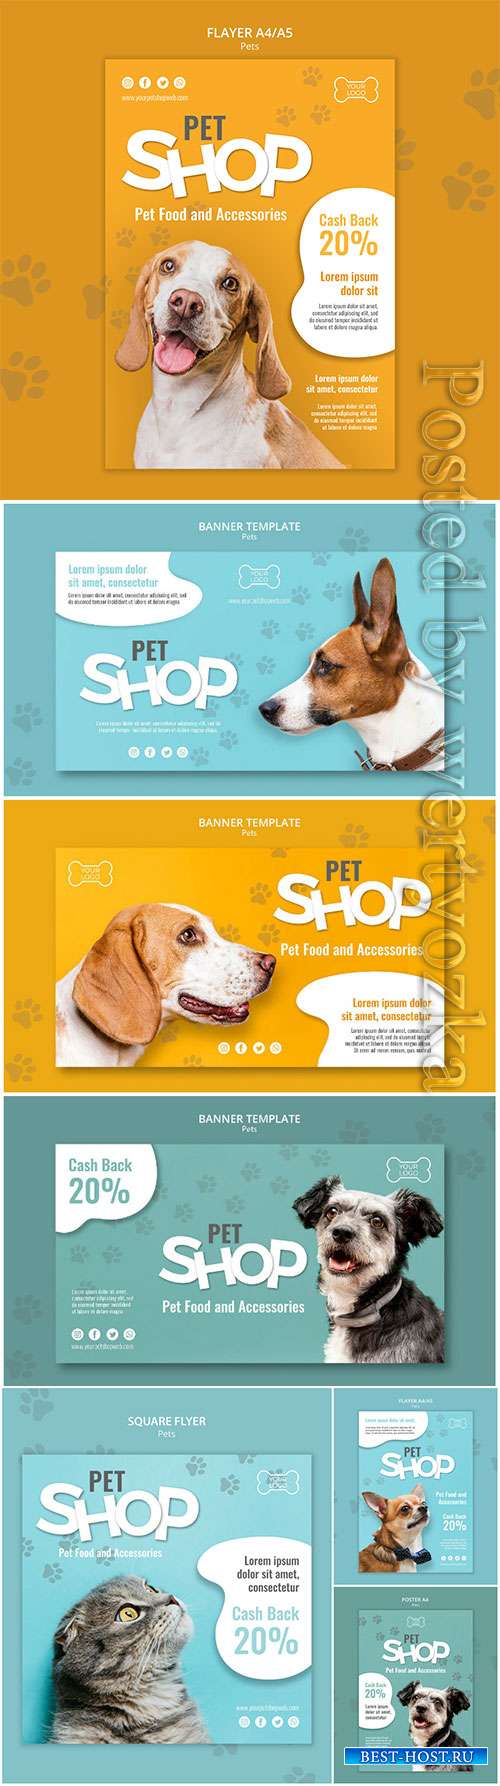 Pet shop banner template with photo